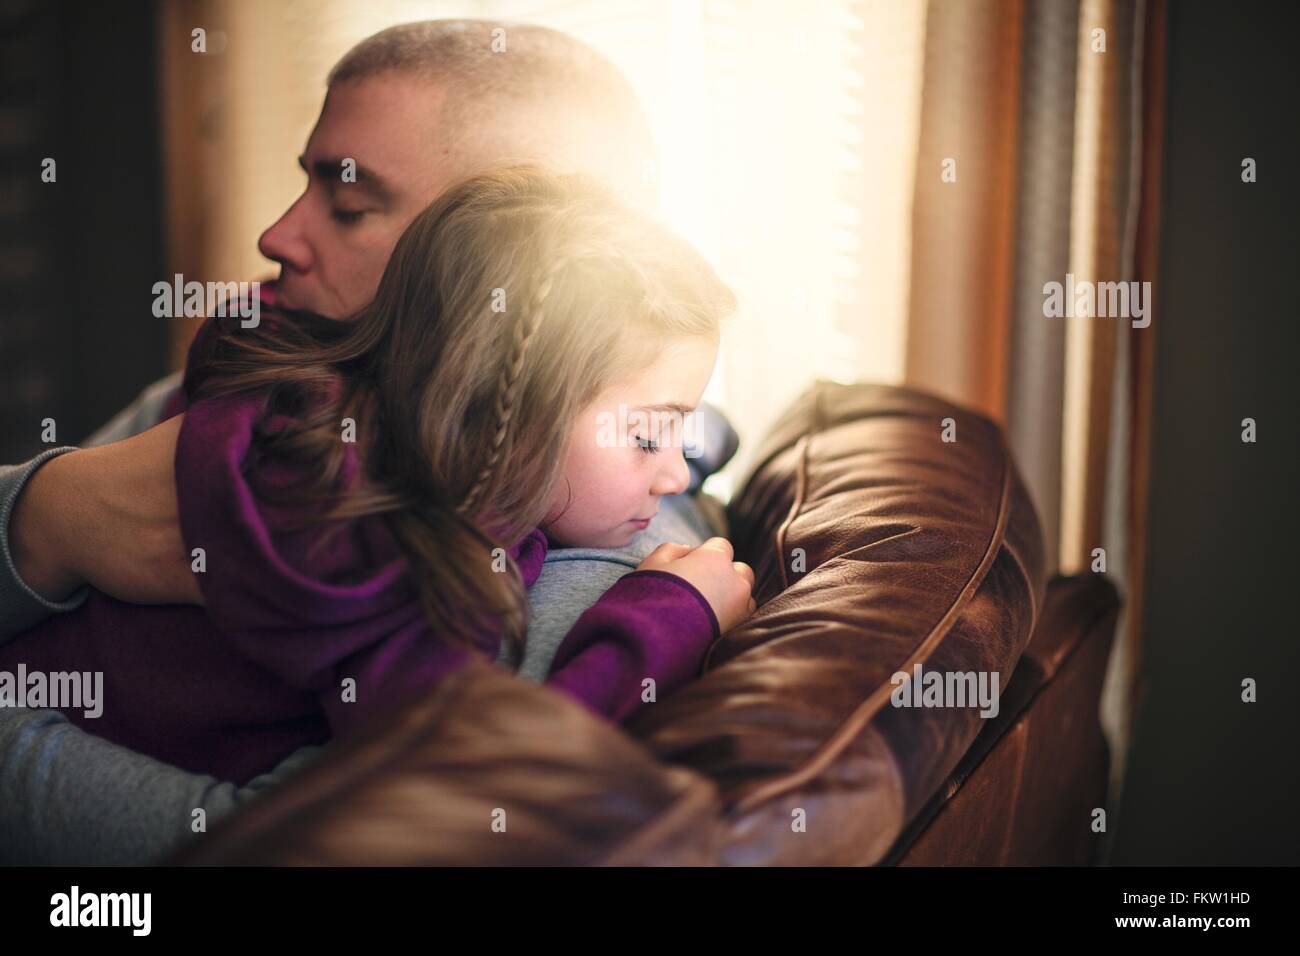 Man relaxing on sofa hugging daughter Banque D'Images